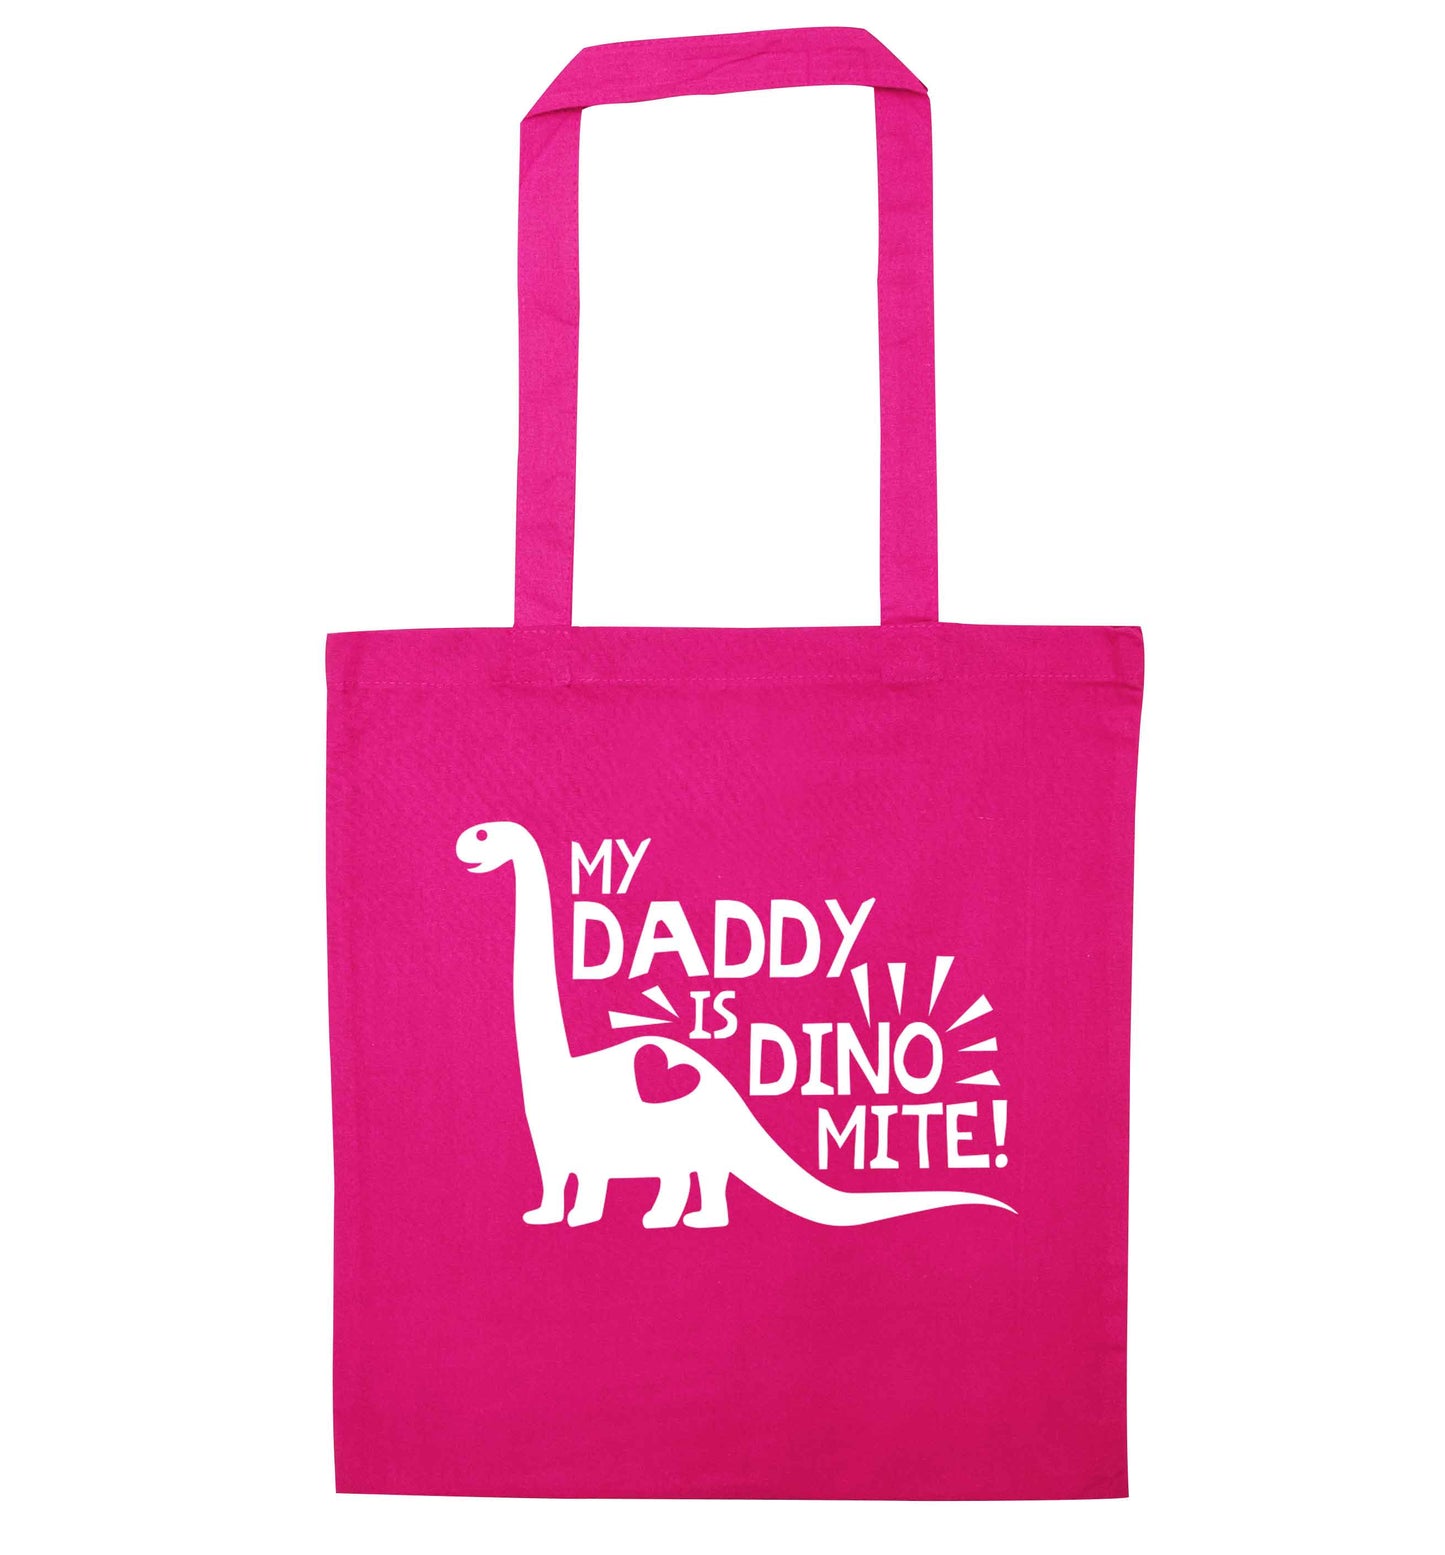 My daddy is dinomite! pink tote bag